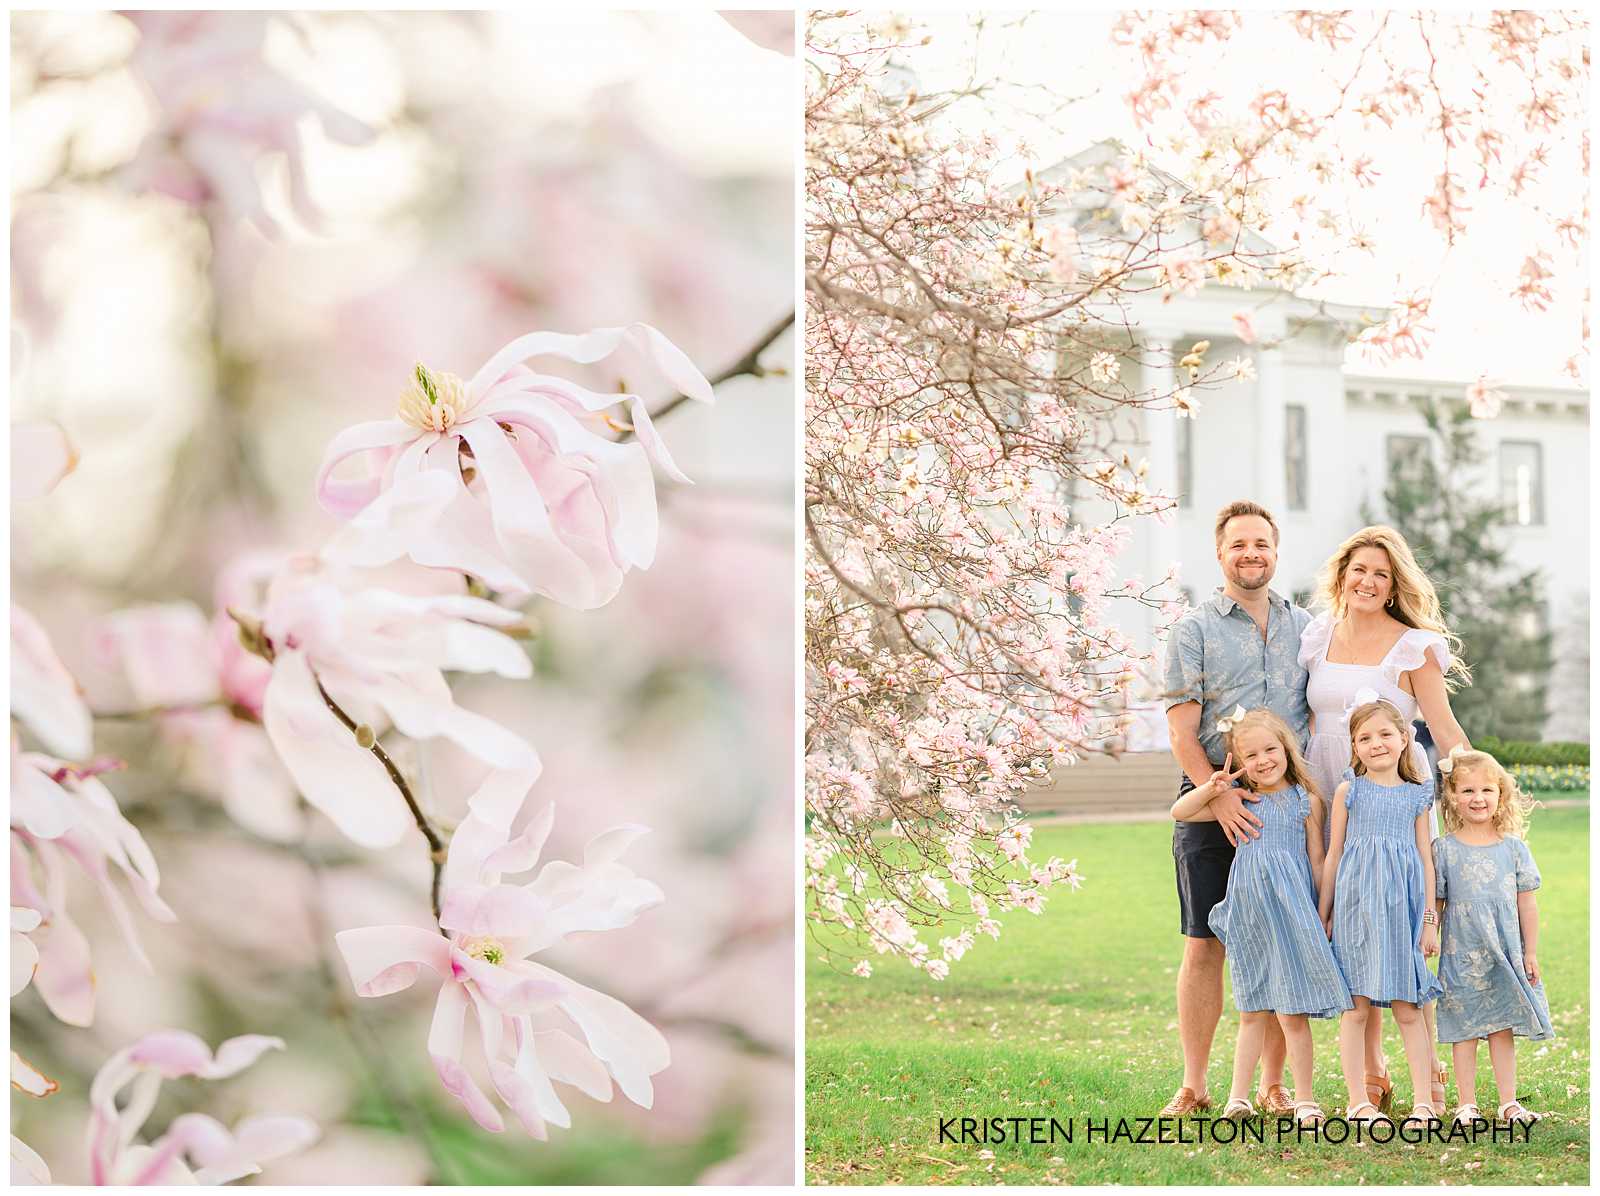 A family with three young daughters wearing blue dresses by Downers Grove Photographer Kristen Hazelton